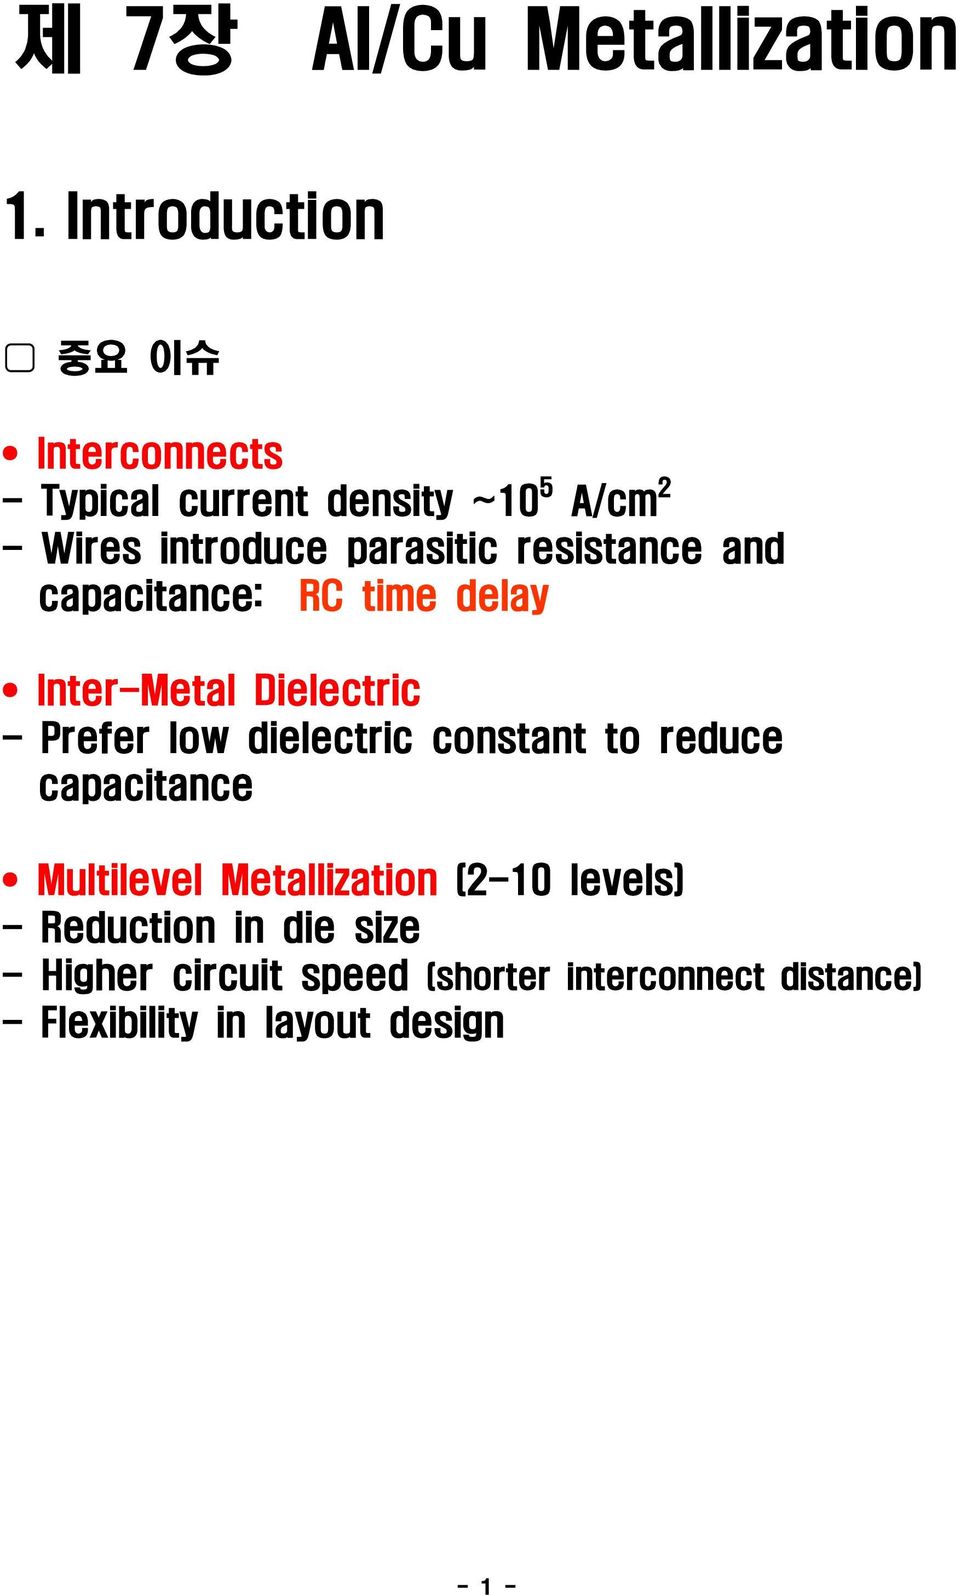 resistance and capacitance: RC time delay Inter-Metal Dielectric - Prefer low dielectric constant to